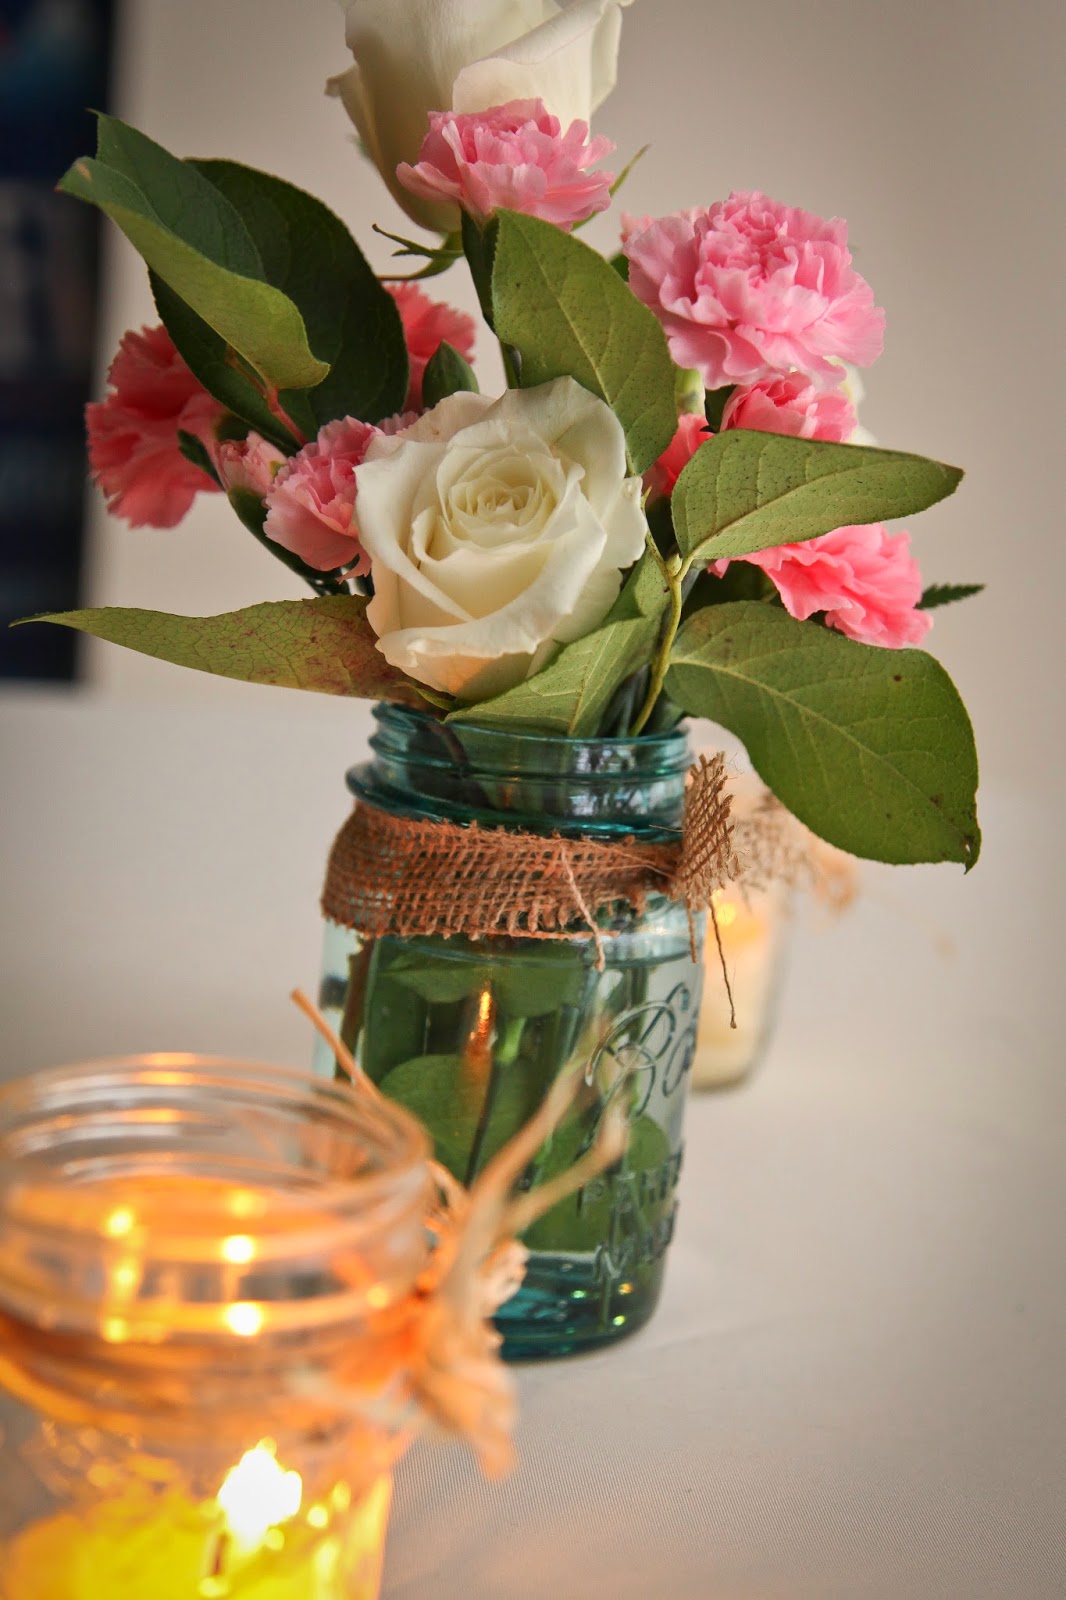 DIY Why Spend More: Flowers from Sam's Club for wedding